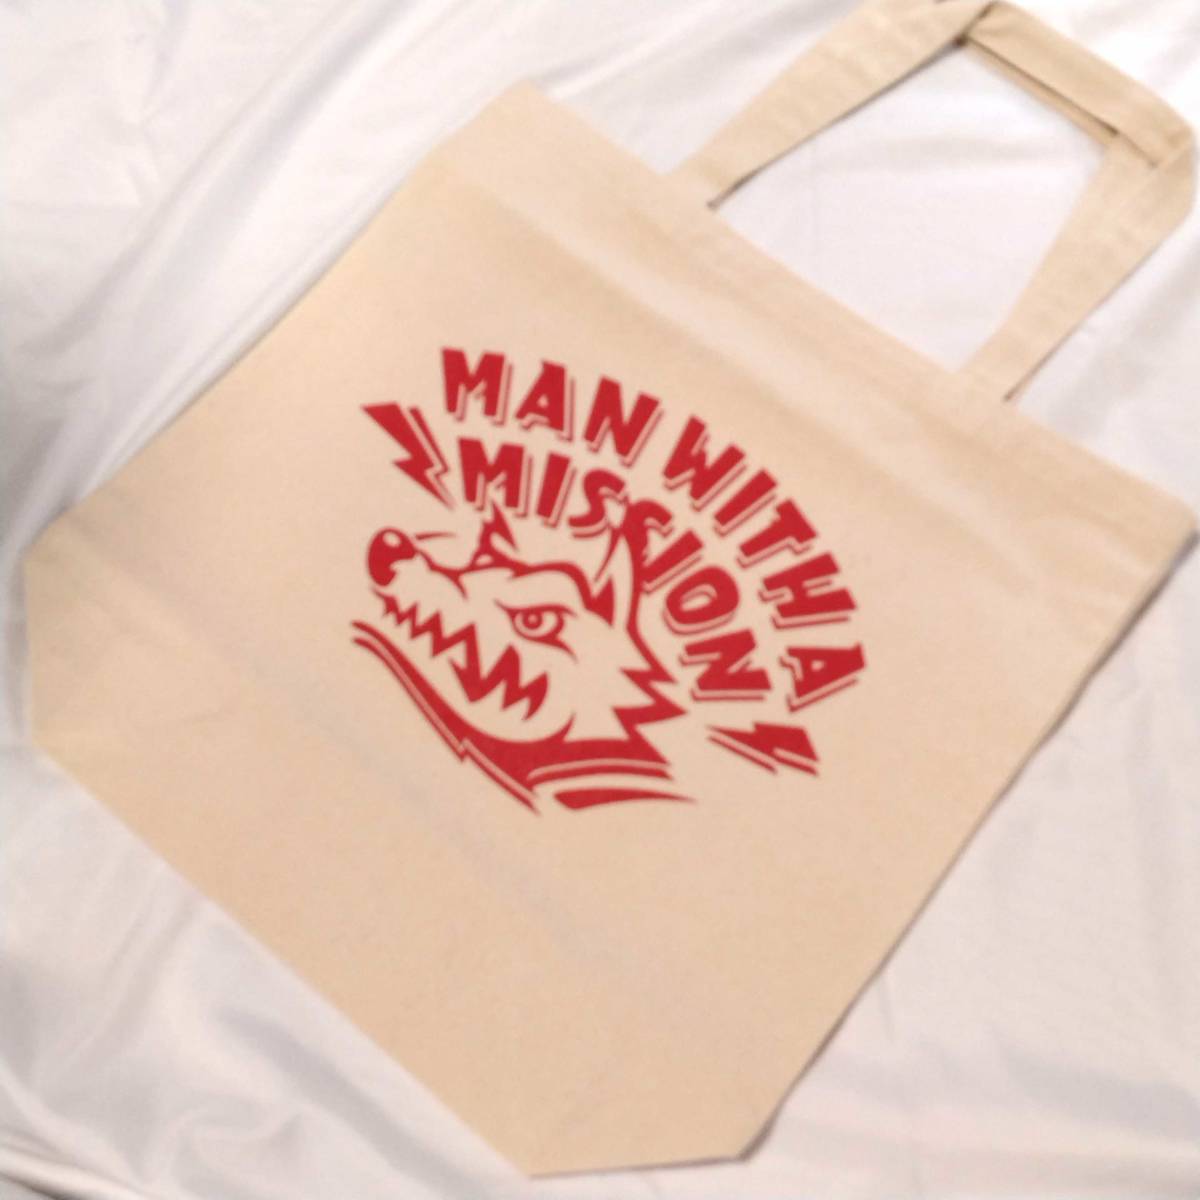 MAN WITH A MISSION トートバッグ ジャンケンジョニー 赤 レッド 未使用 ◆ マンウィズ グッズ_画像1